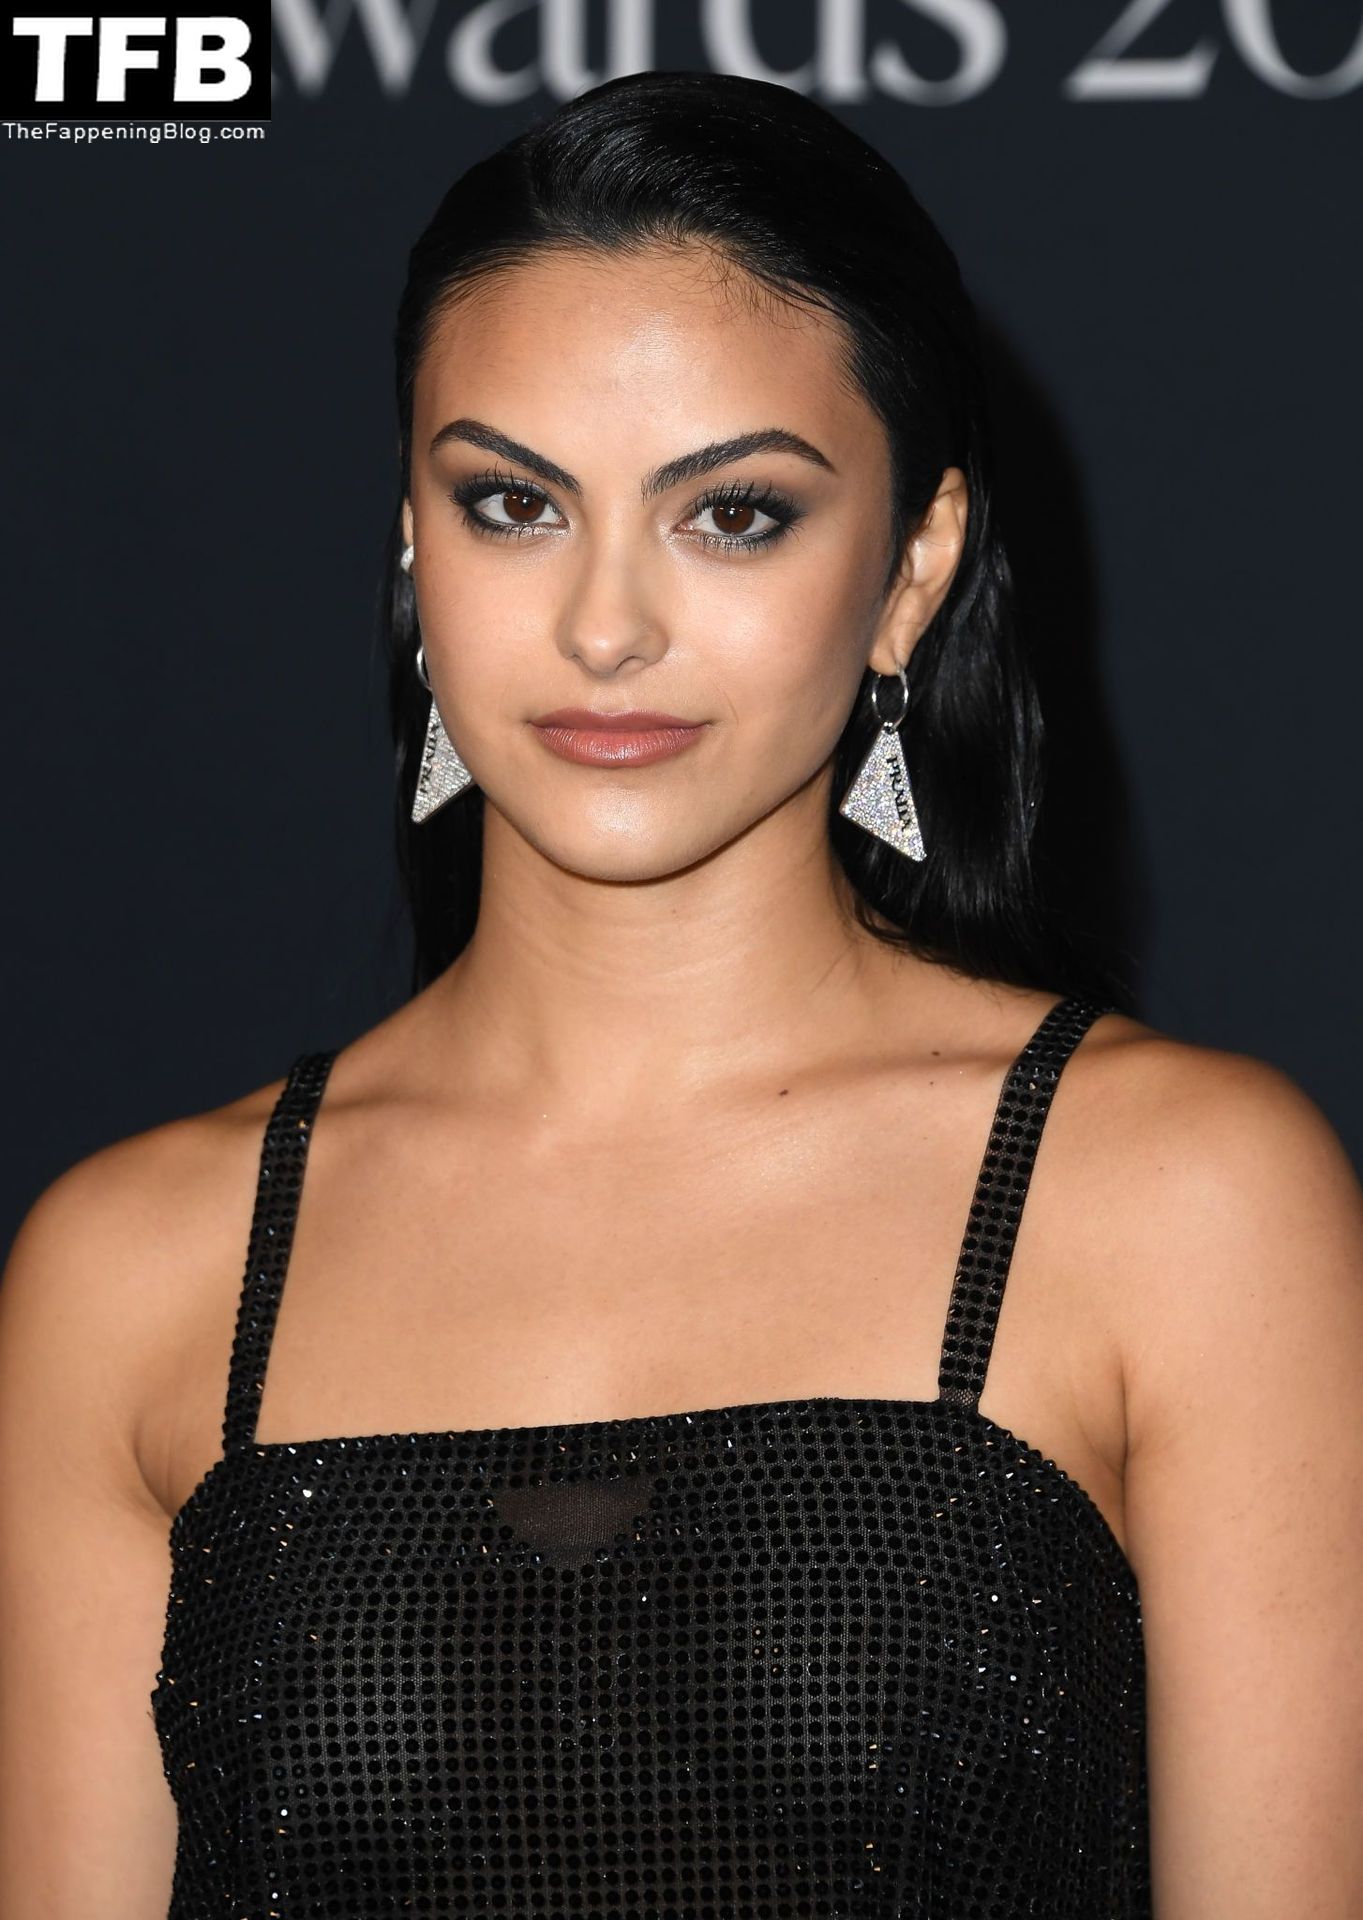 Camila-Mendes-See-Through-Tits-The-Fappening-Blog-44.jpg